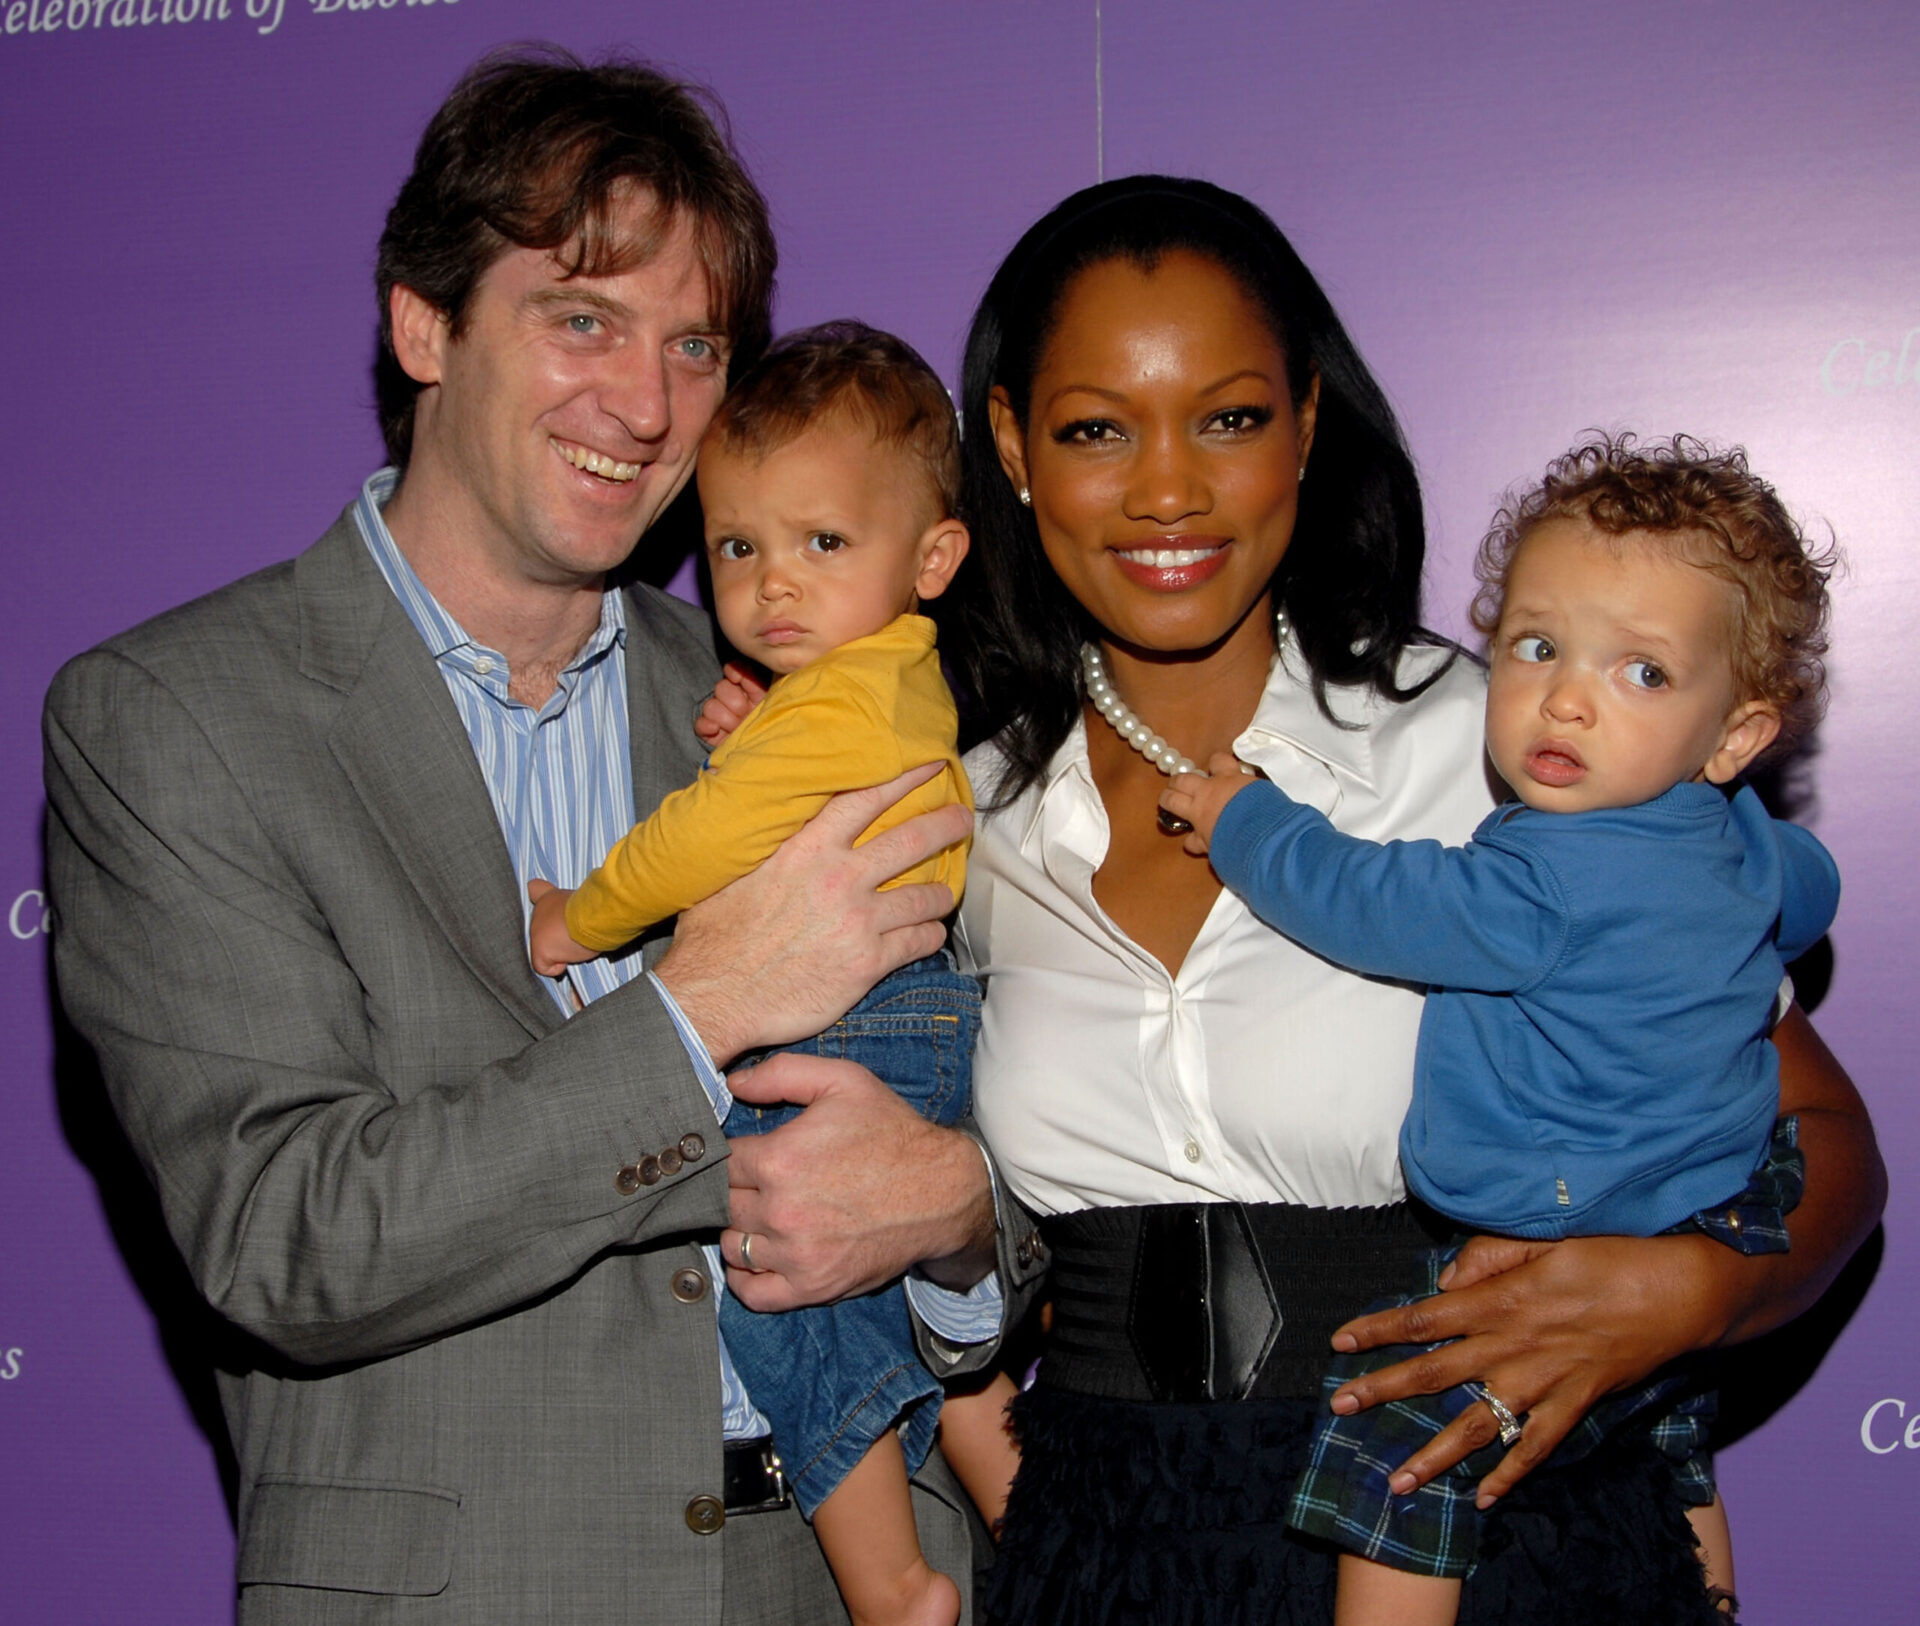 Garcelle Beauvais' ex-husband Mike Nilon Biography: Movies, Age, Height, Net Worth, Girlfriend, Wife, Wiki, Instagram